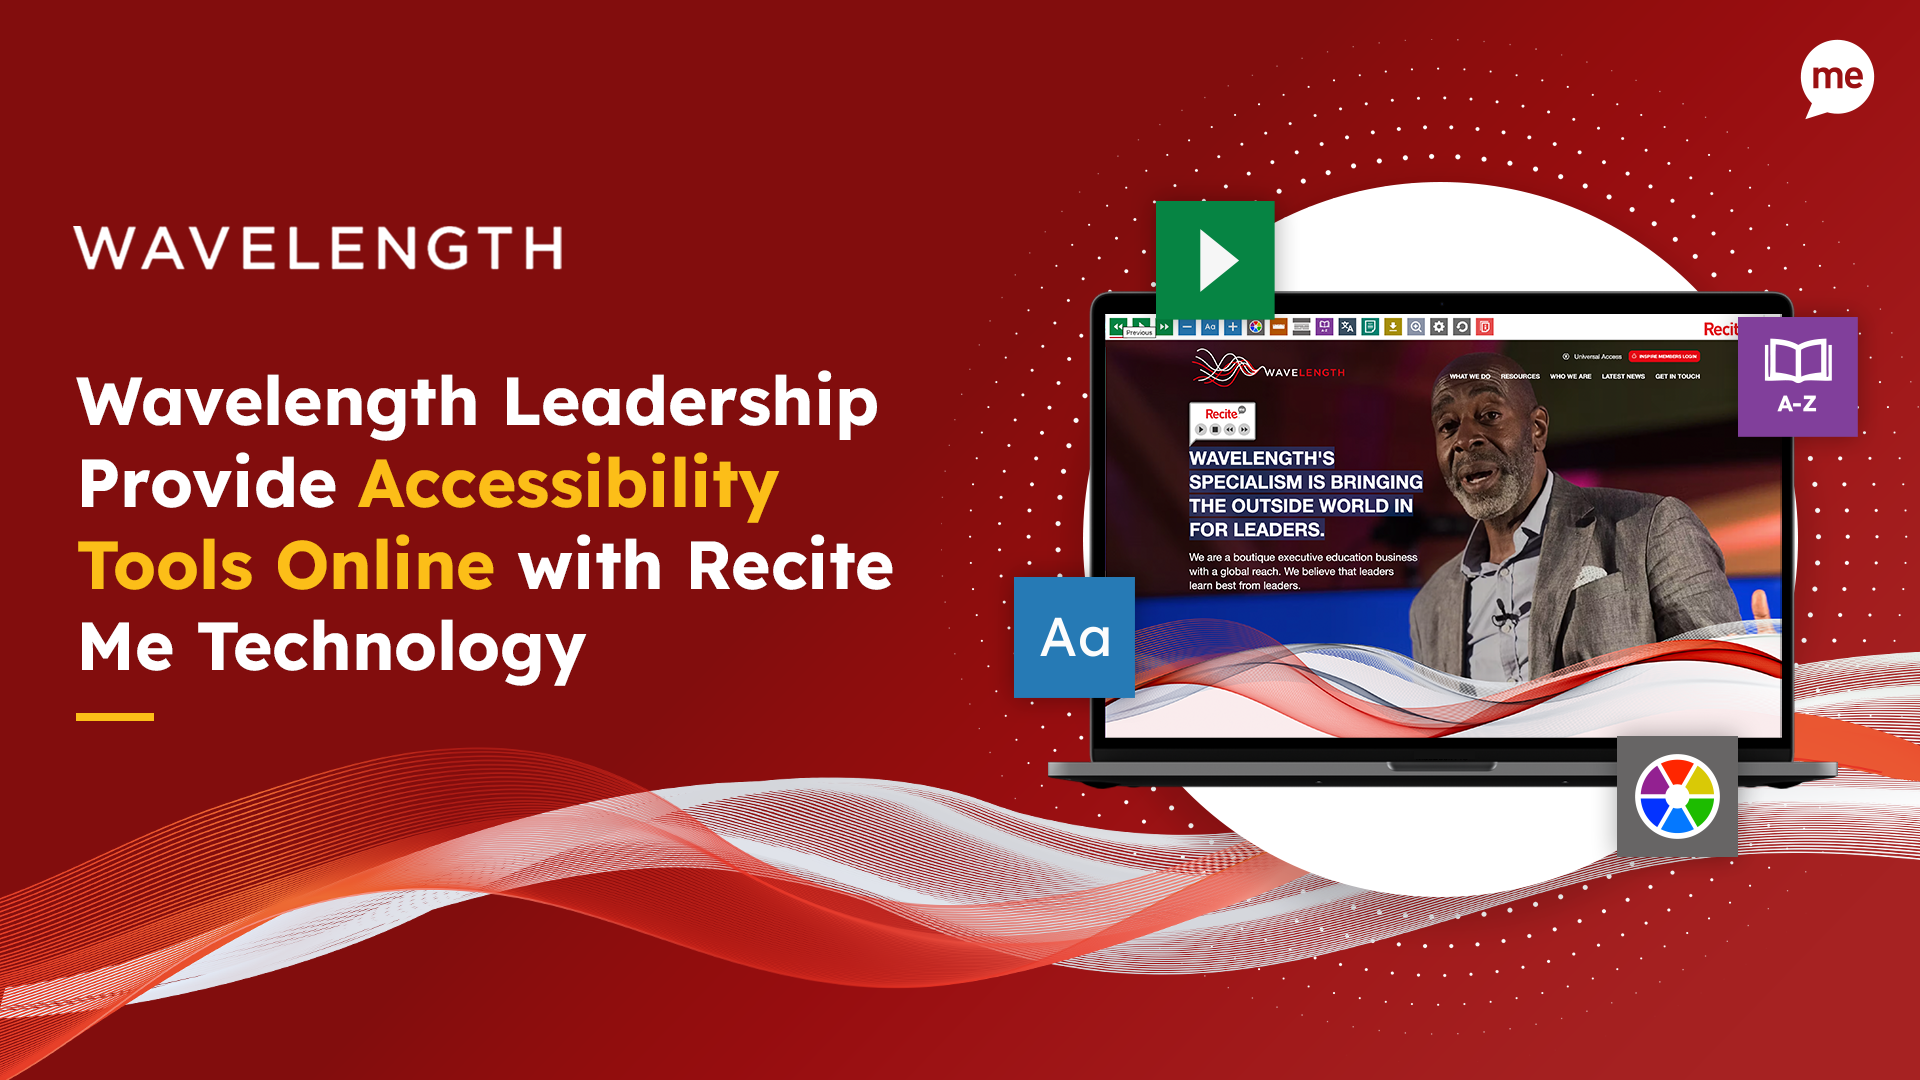 Wavelength Provide Accessibility Tools Online with Recite Me